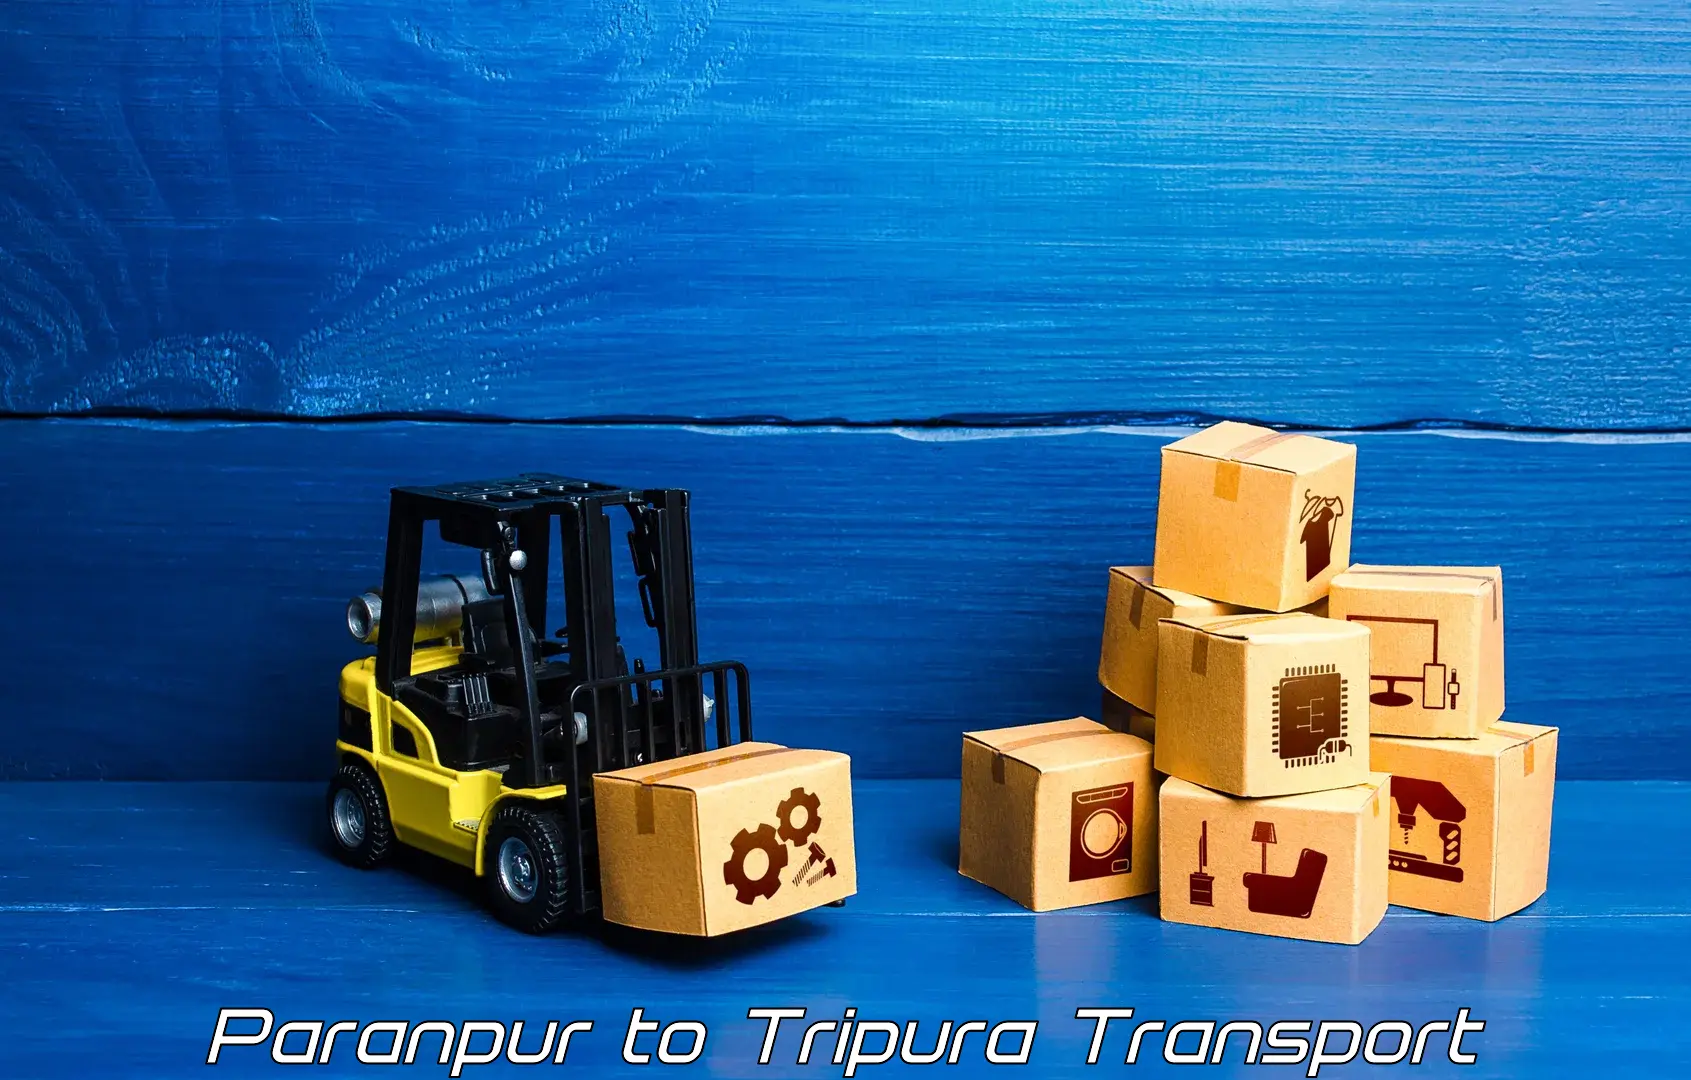 Express transport services in Paranpur to Dharmanagar